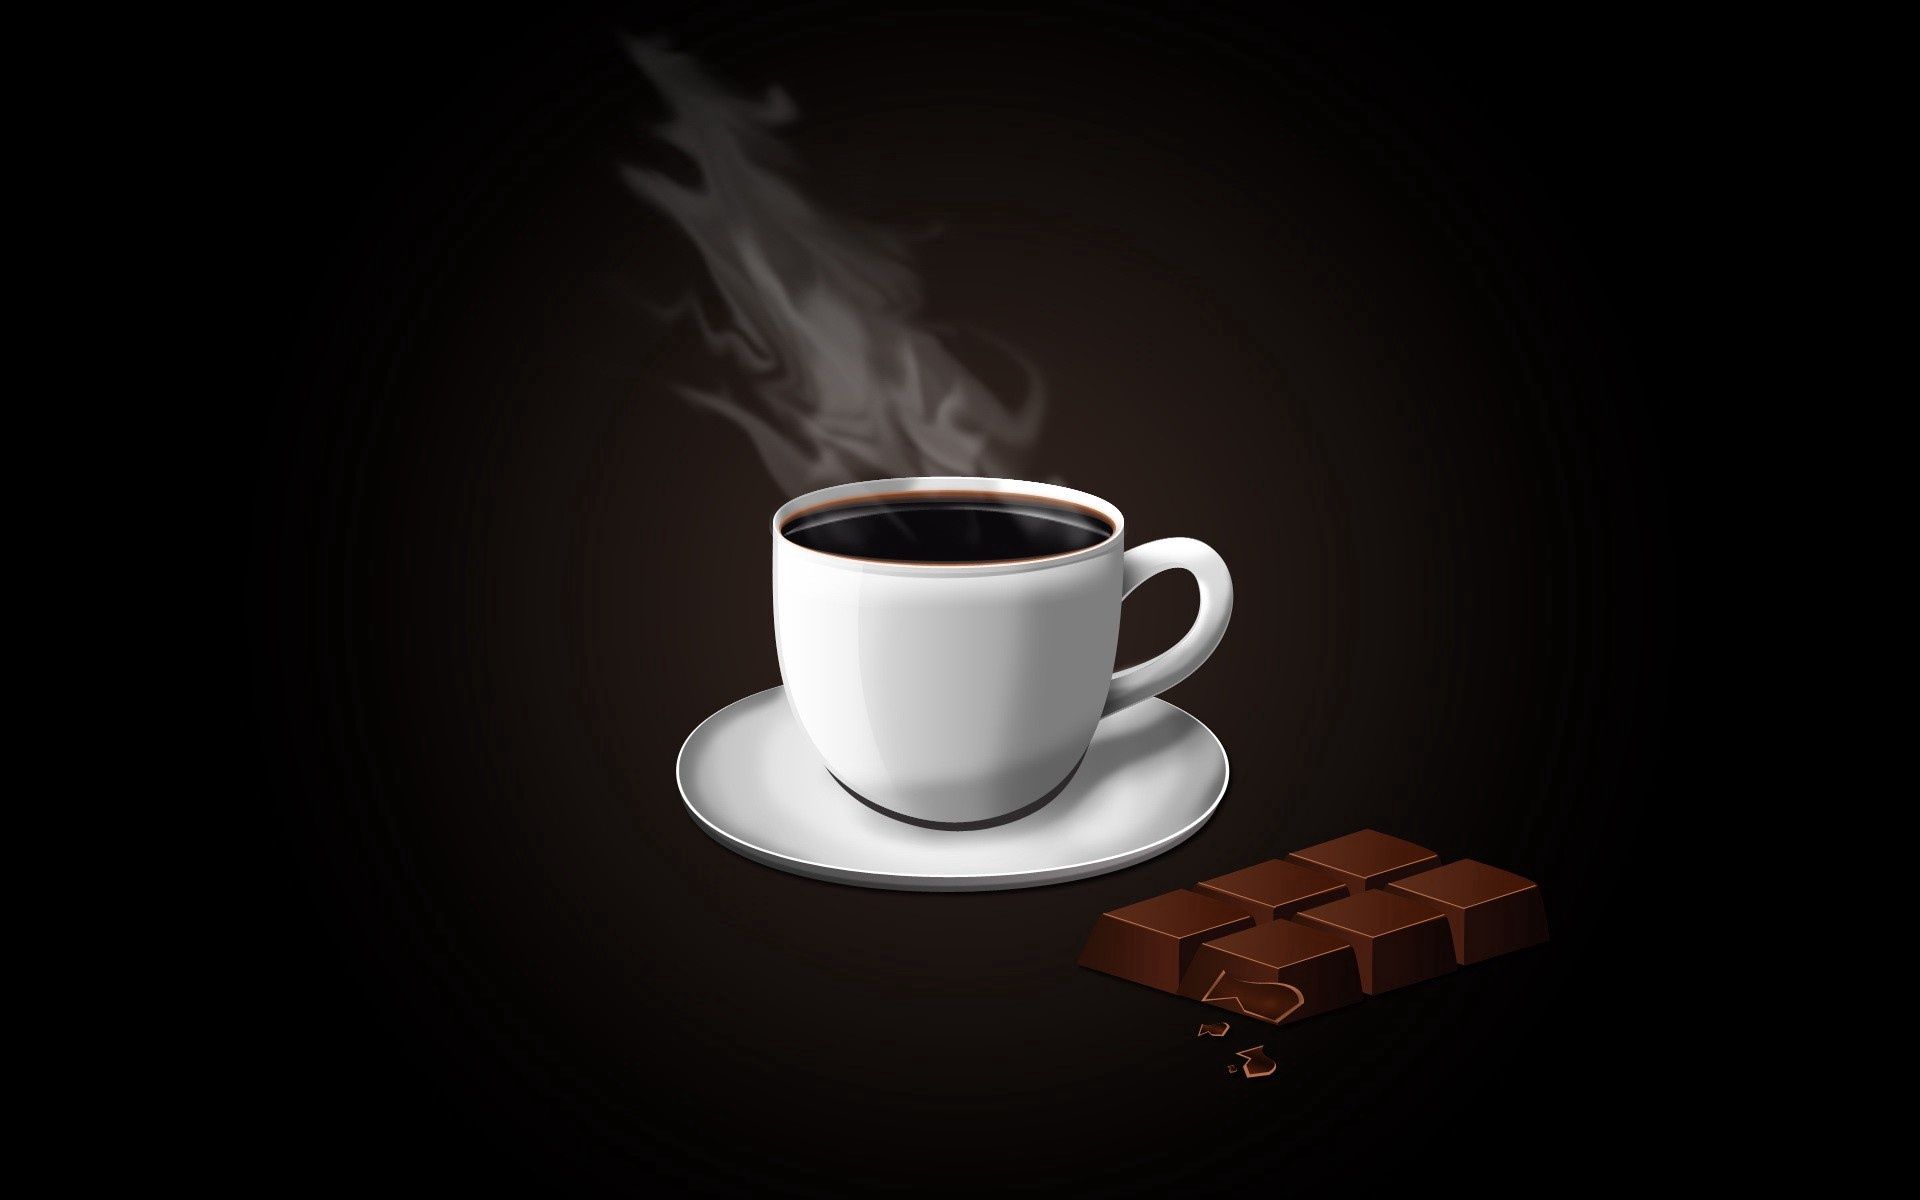 Windows Backgrounds vector, chocolate, coffee, cup, plate, steam